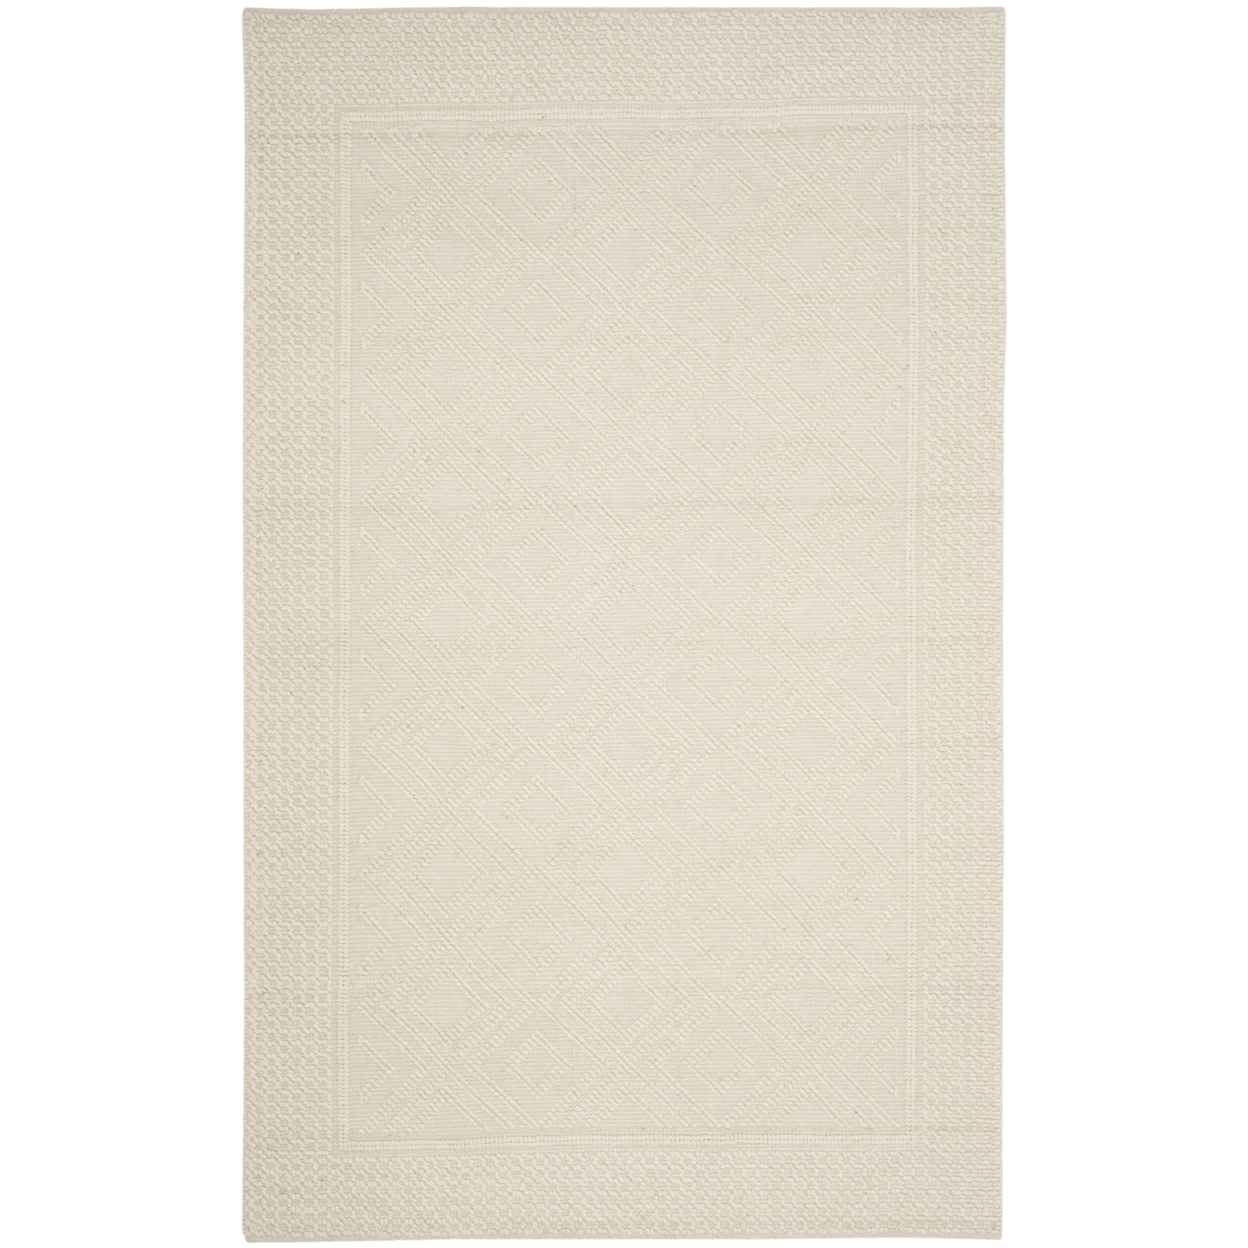 SAFAVIEH Vermont Collection VRM212A Handwoven Ivory Rug - 8' Square